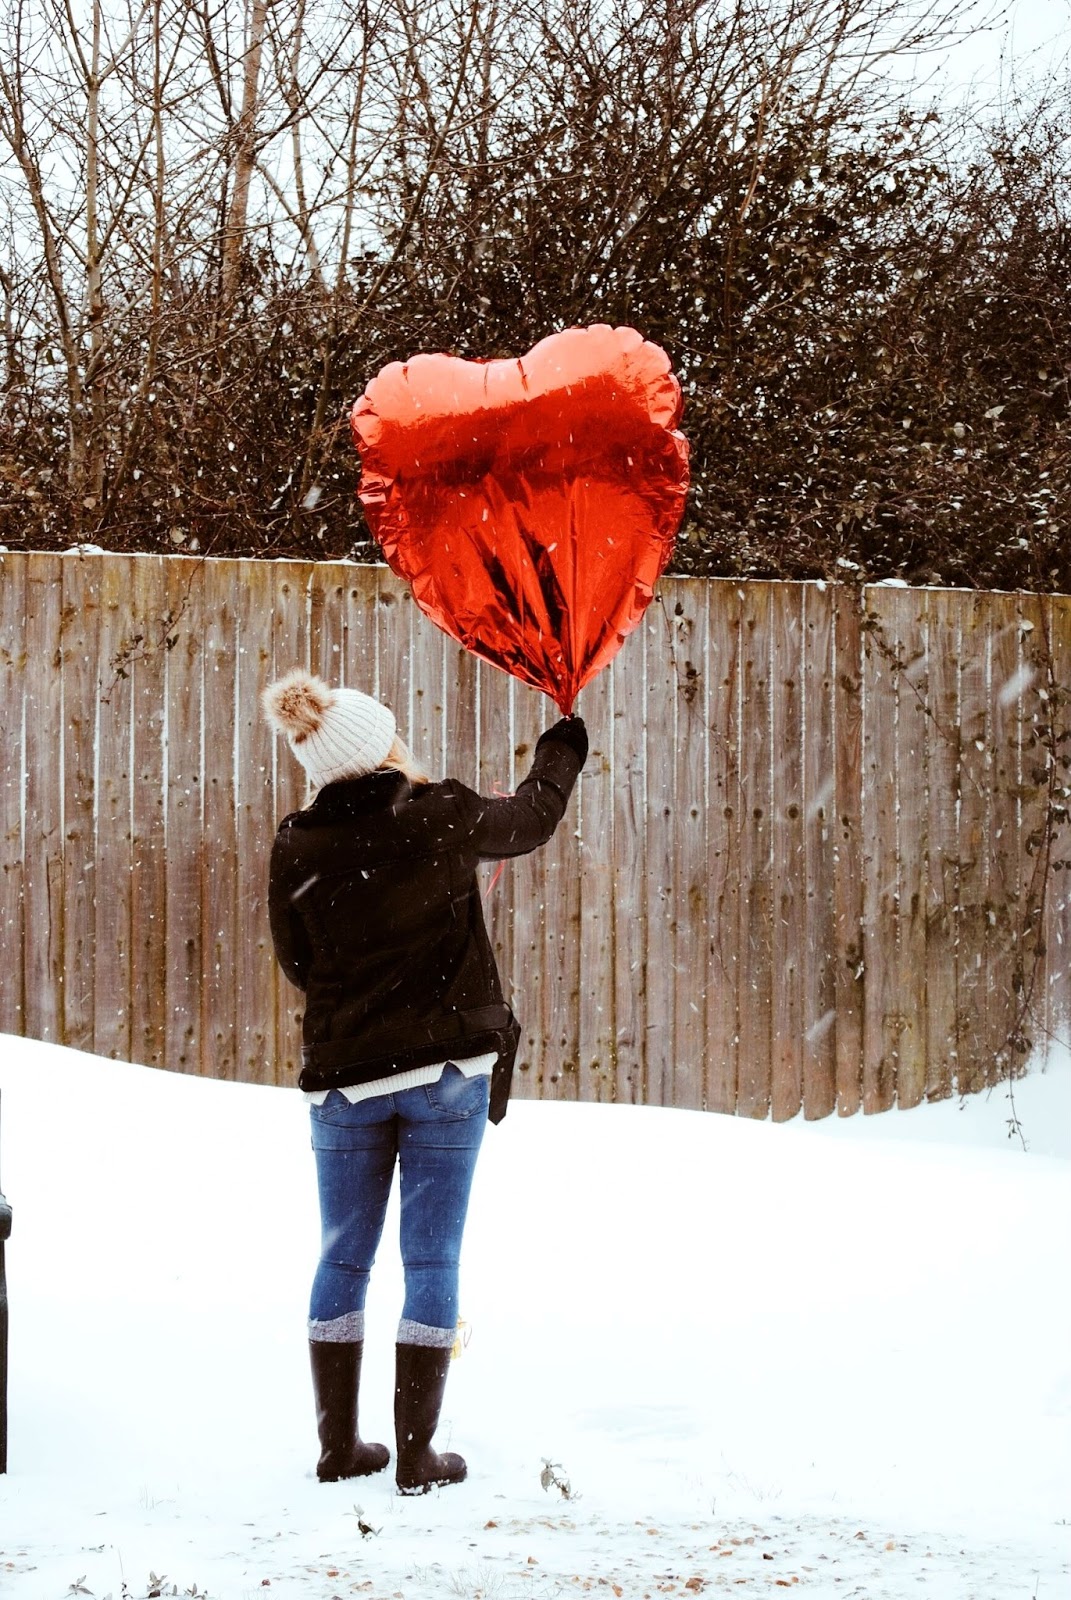 99 red balloons go by snow day 2018 stormemma photography landscape red heart